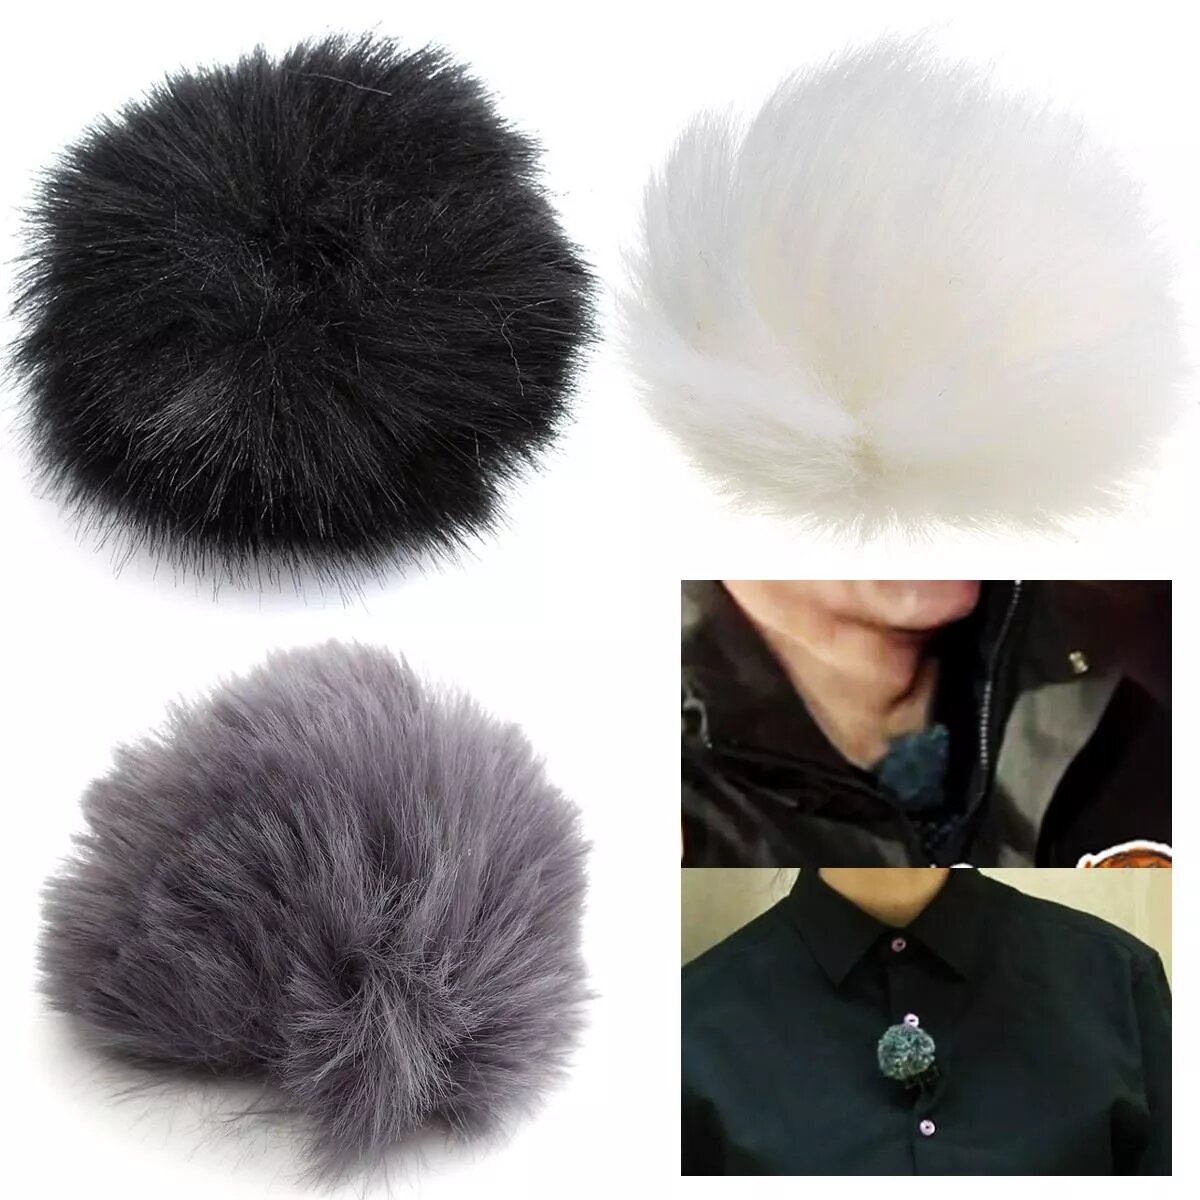 

Bakeey Lapel Lavalier Microphone Furry Windscreen Windshield Wind Muff Soft Comfortable for Lapel Lavalier Microphones M